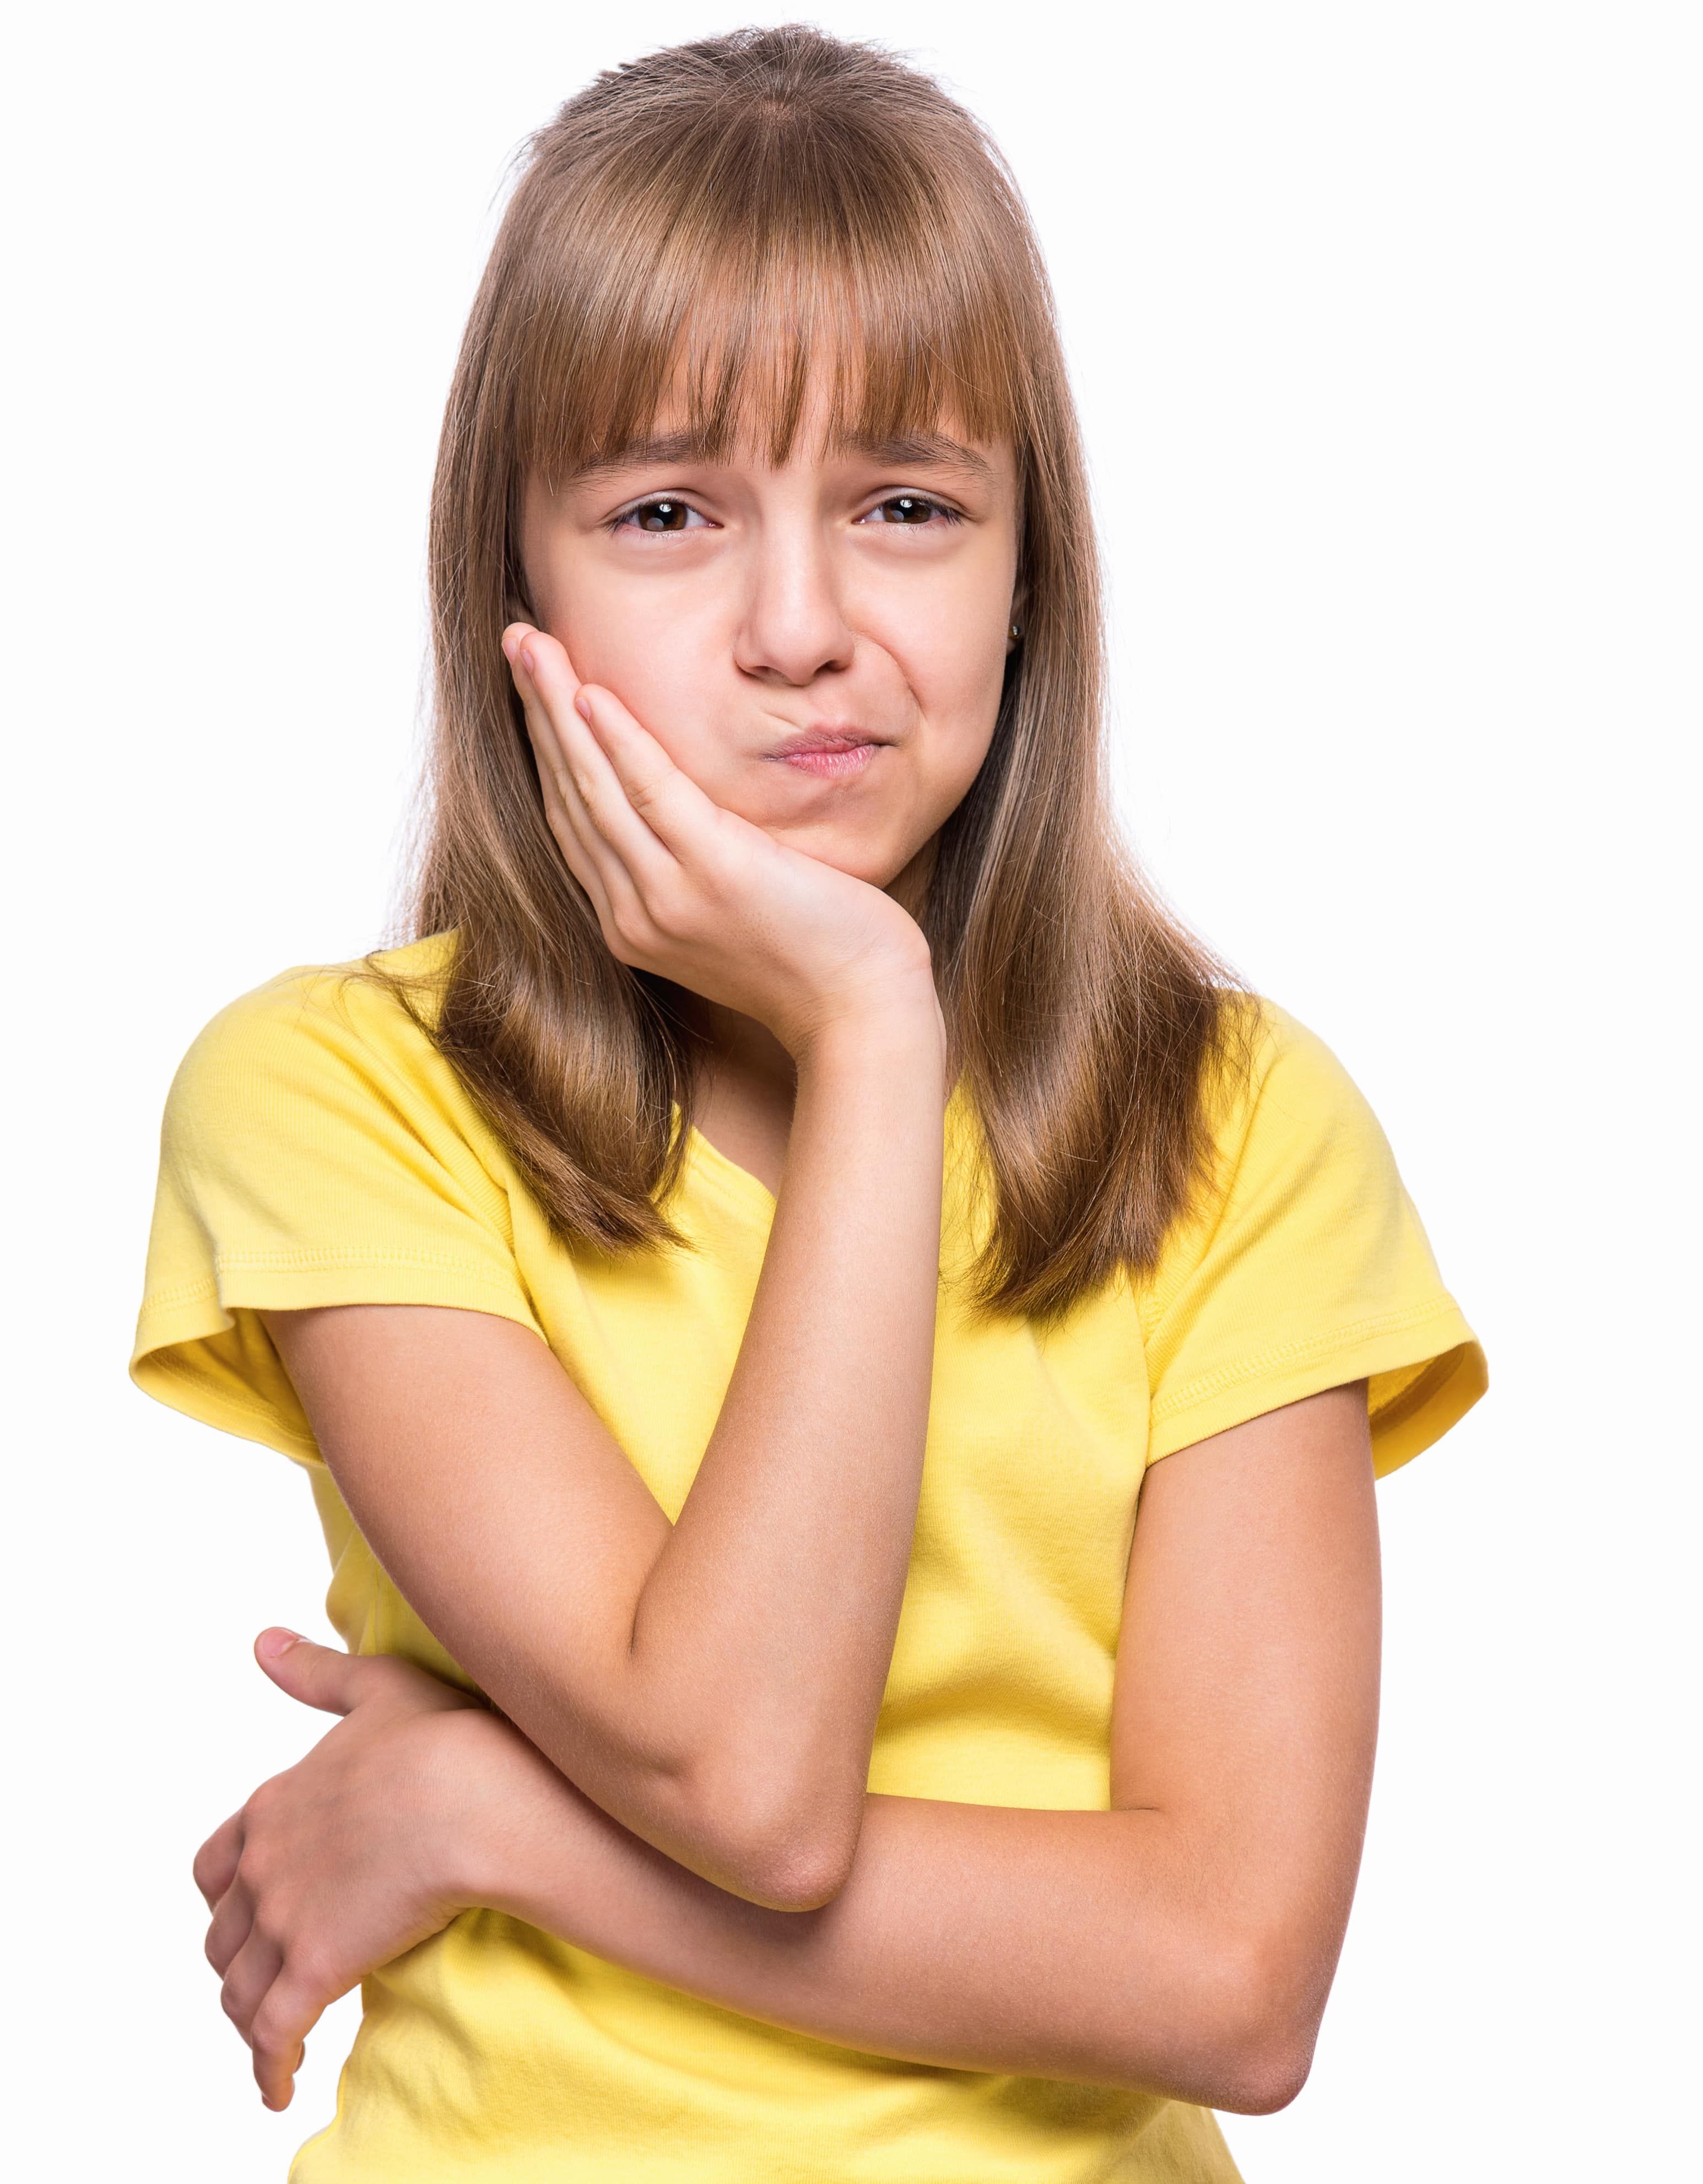 Little girl have toothache, isolated on white background. Emotional portrait of caucasian girl wearing yellow t-shirt. Sad child with tooth pain. Dental problem - kid suffering from toothache.